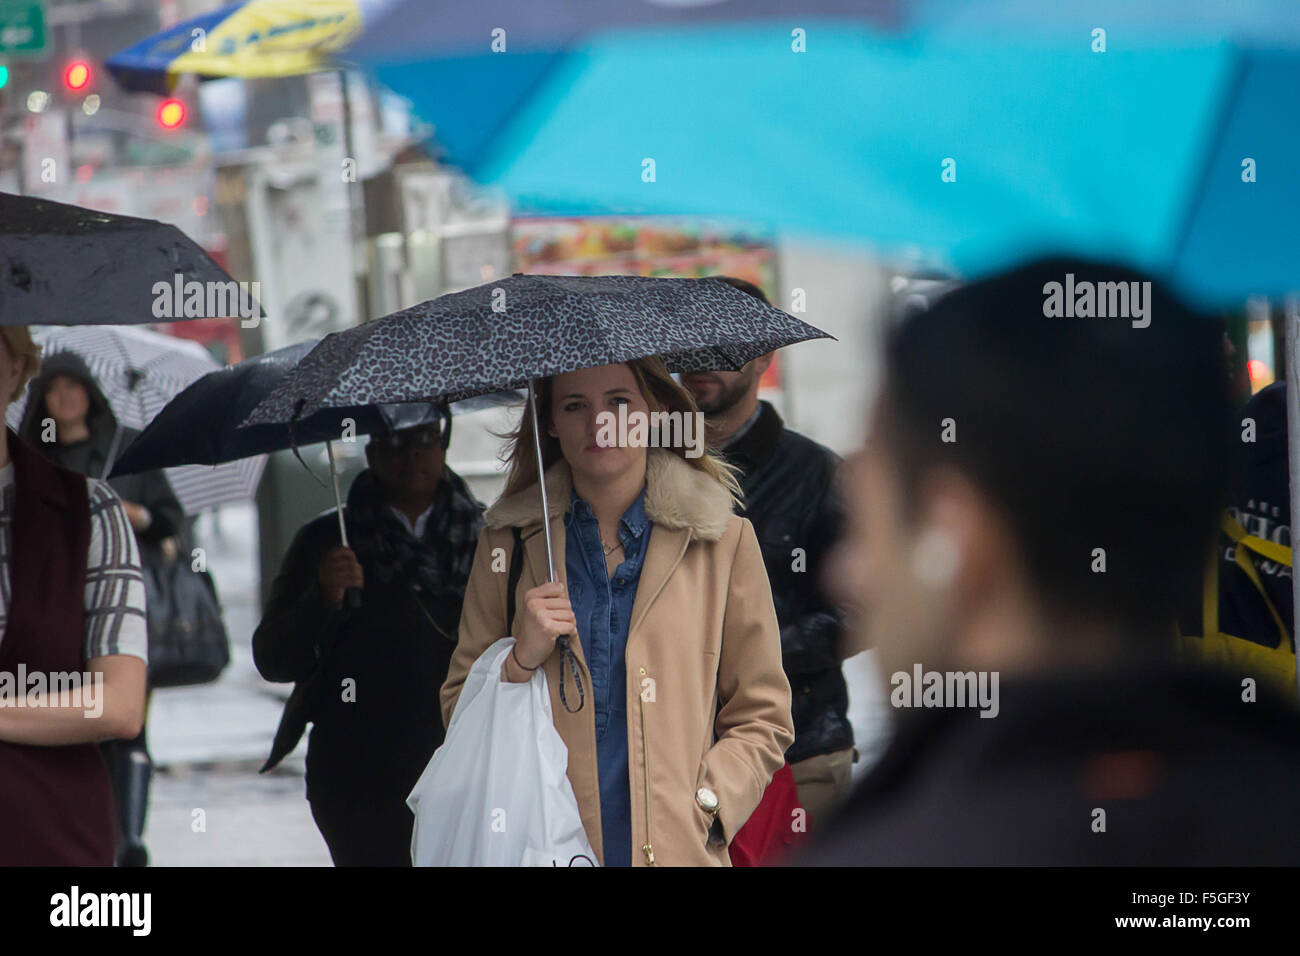 The Dreamer- a young lady is caught "guy-watching" before crossing the street on Broadway in New York City on a rainy day Stock Photo